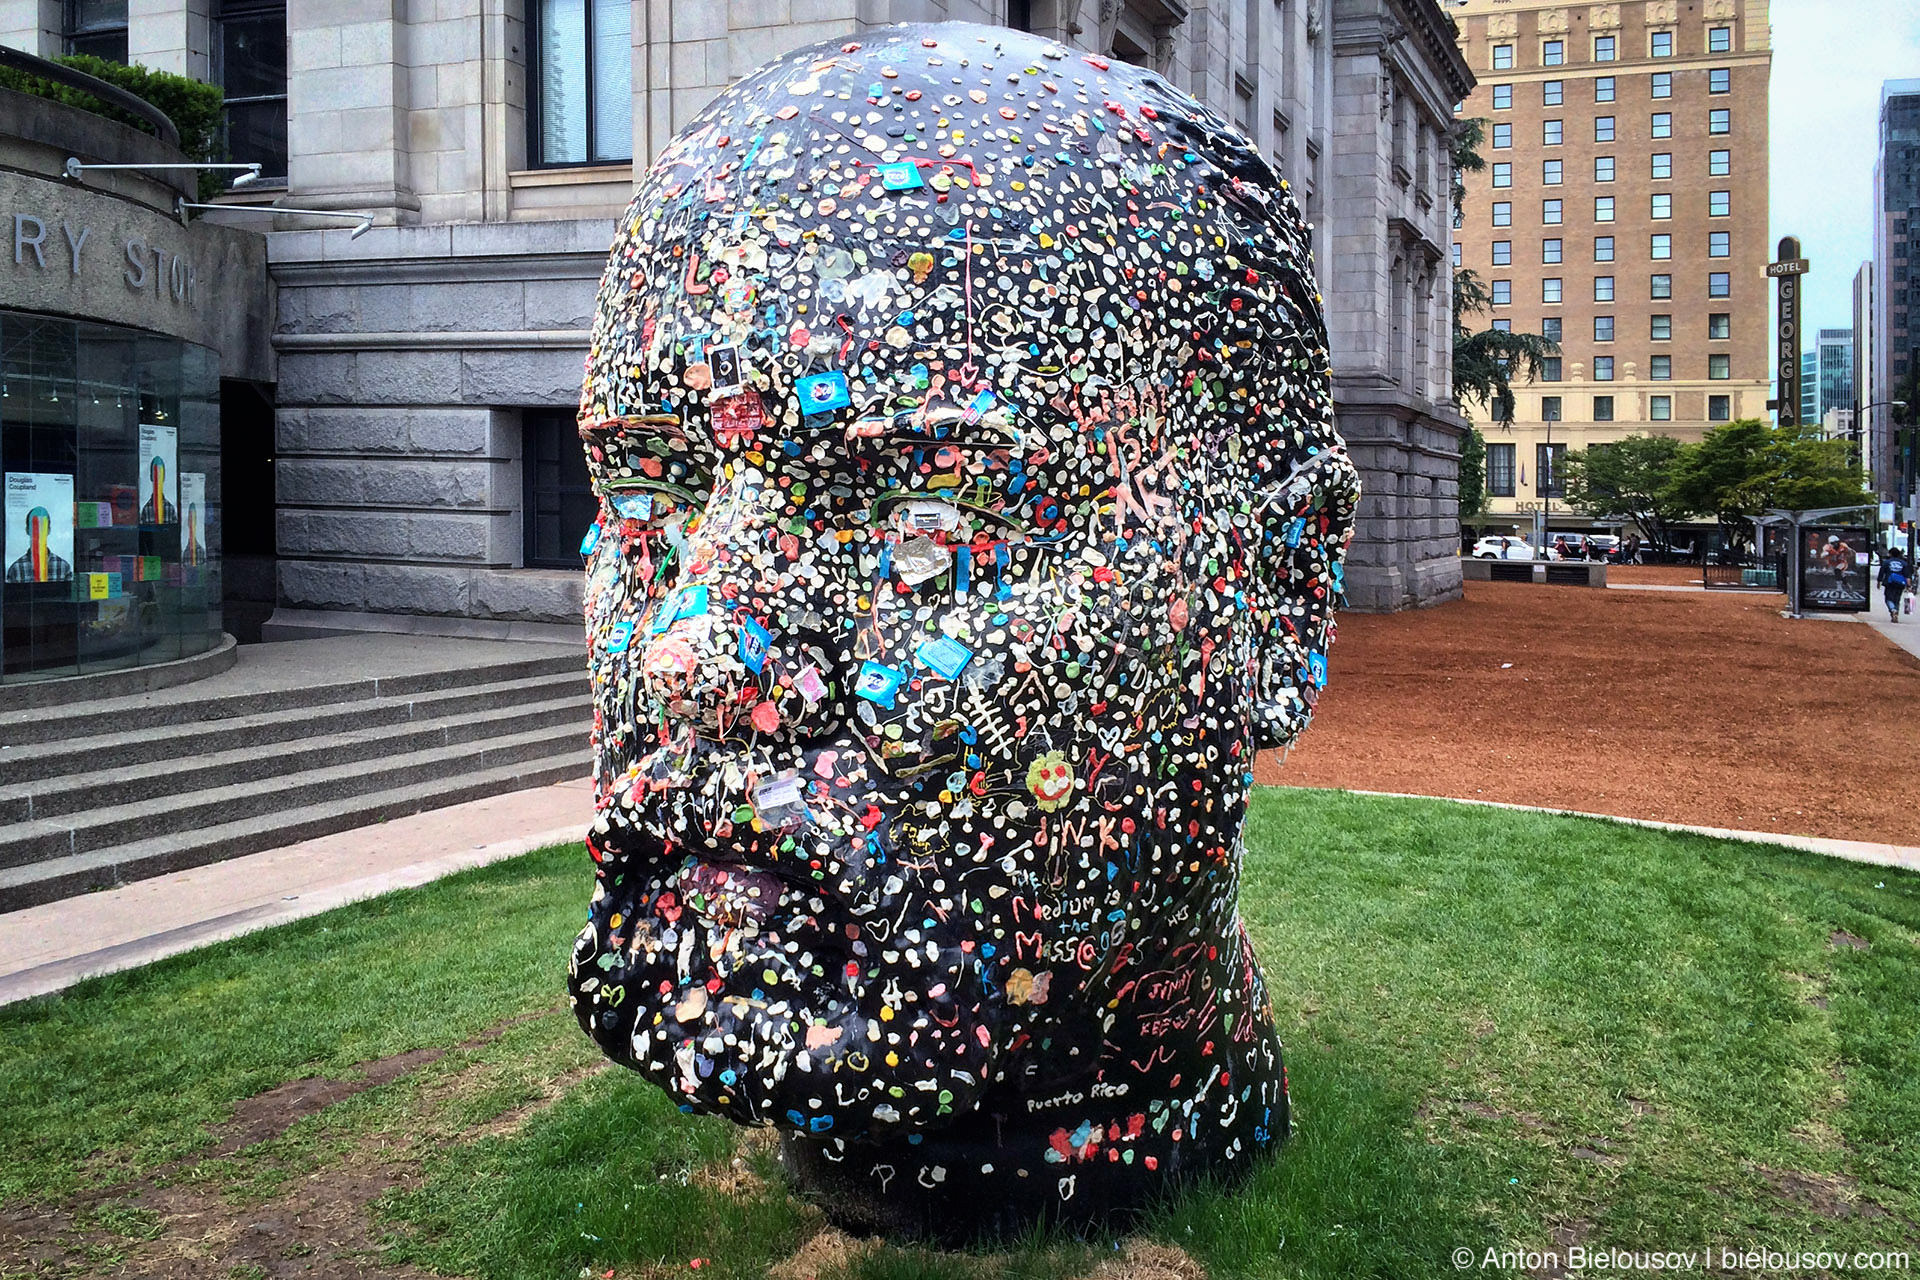 Douglas Coupland's Gumhead in Vancouver